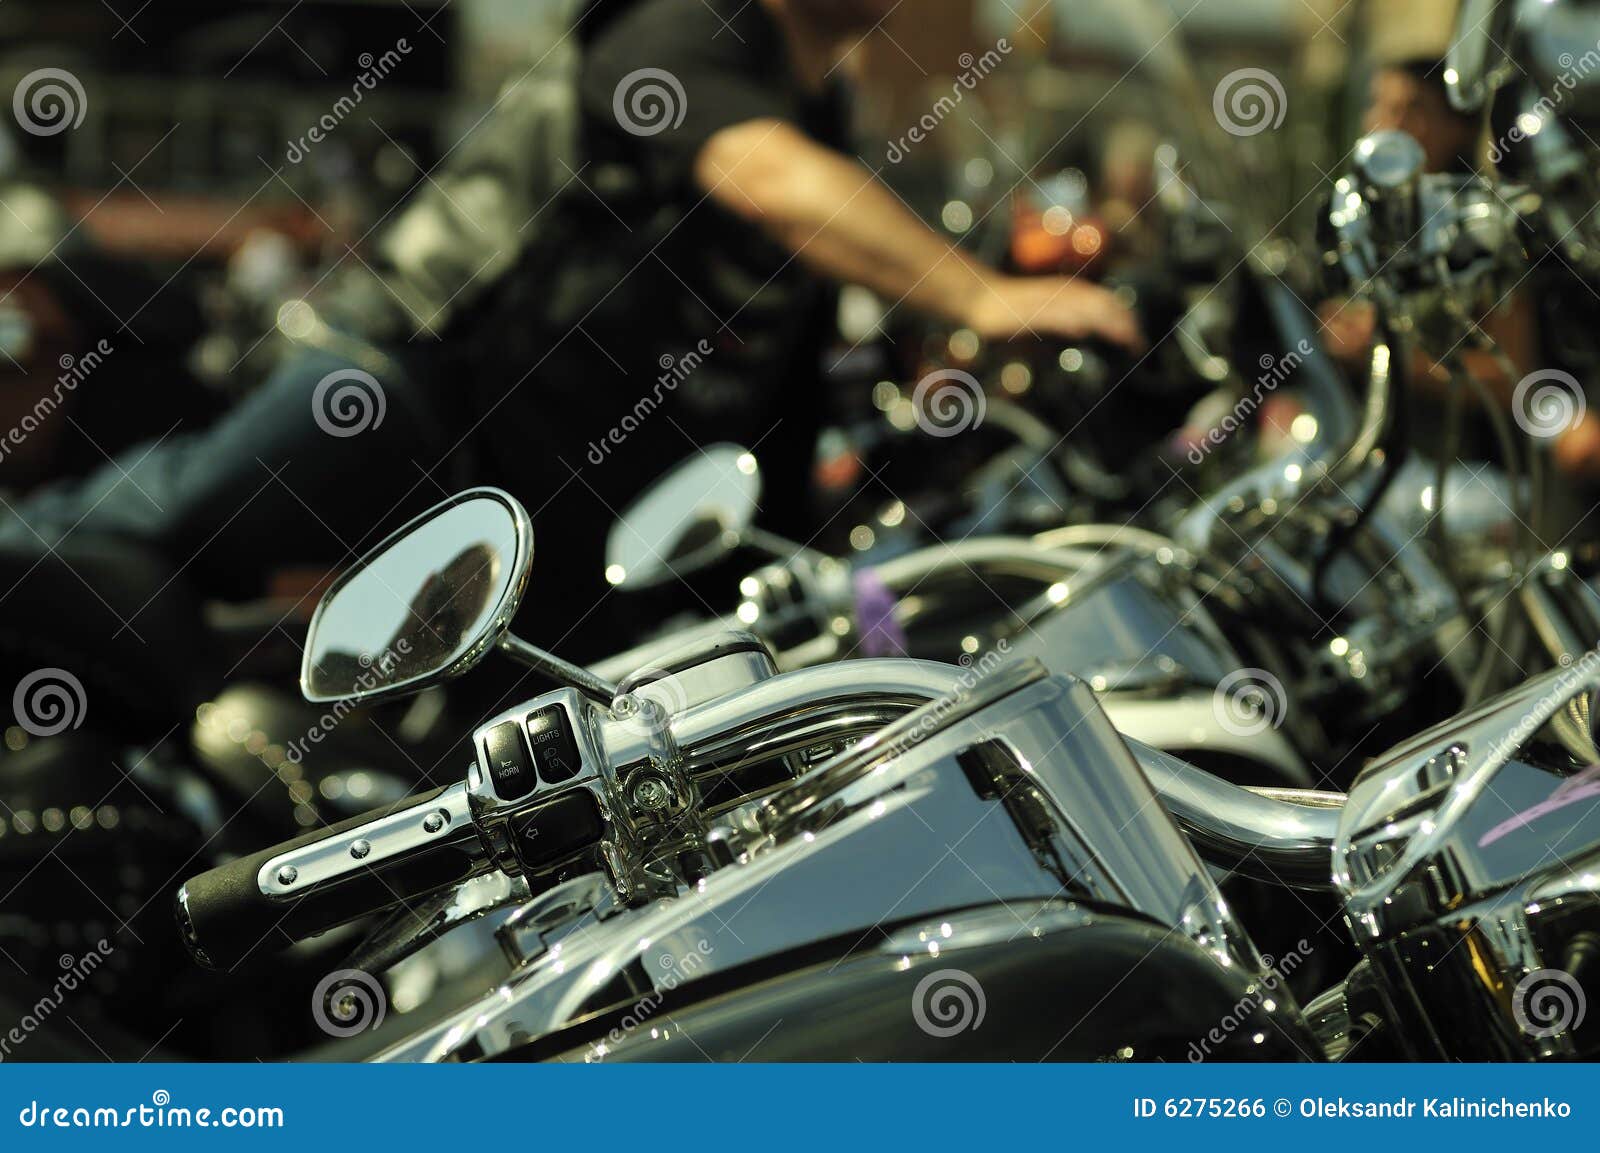 motorbikes in a row